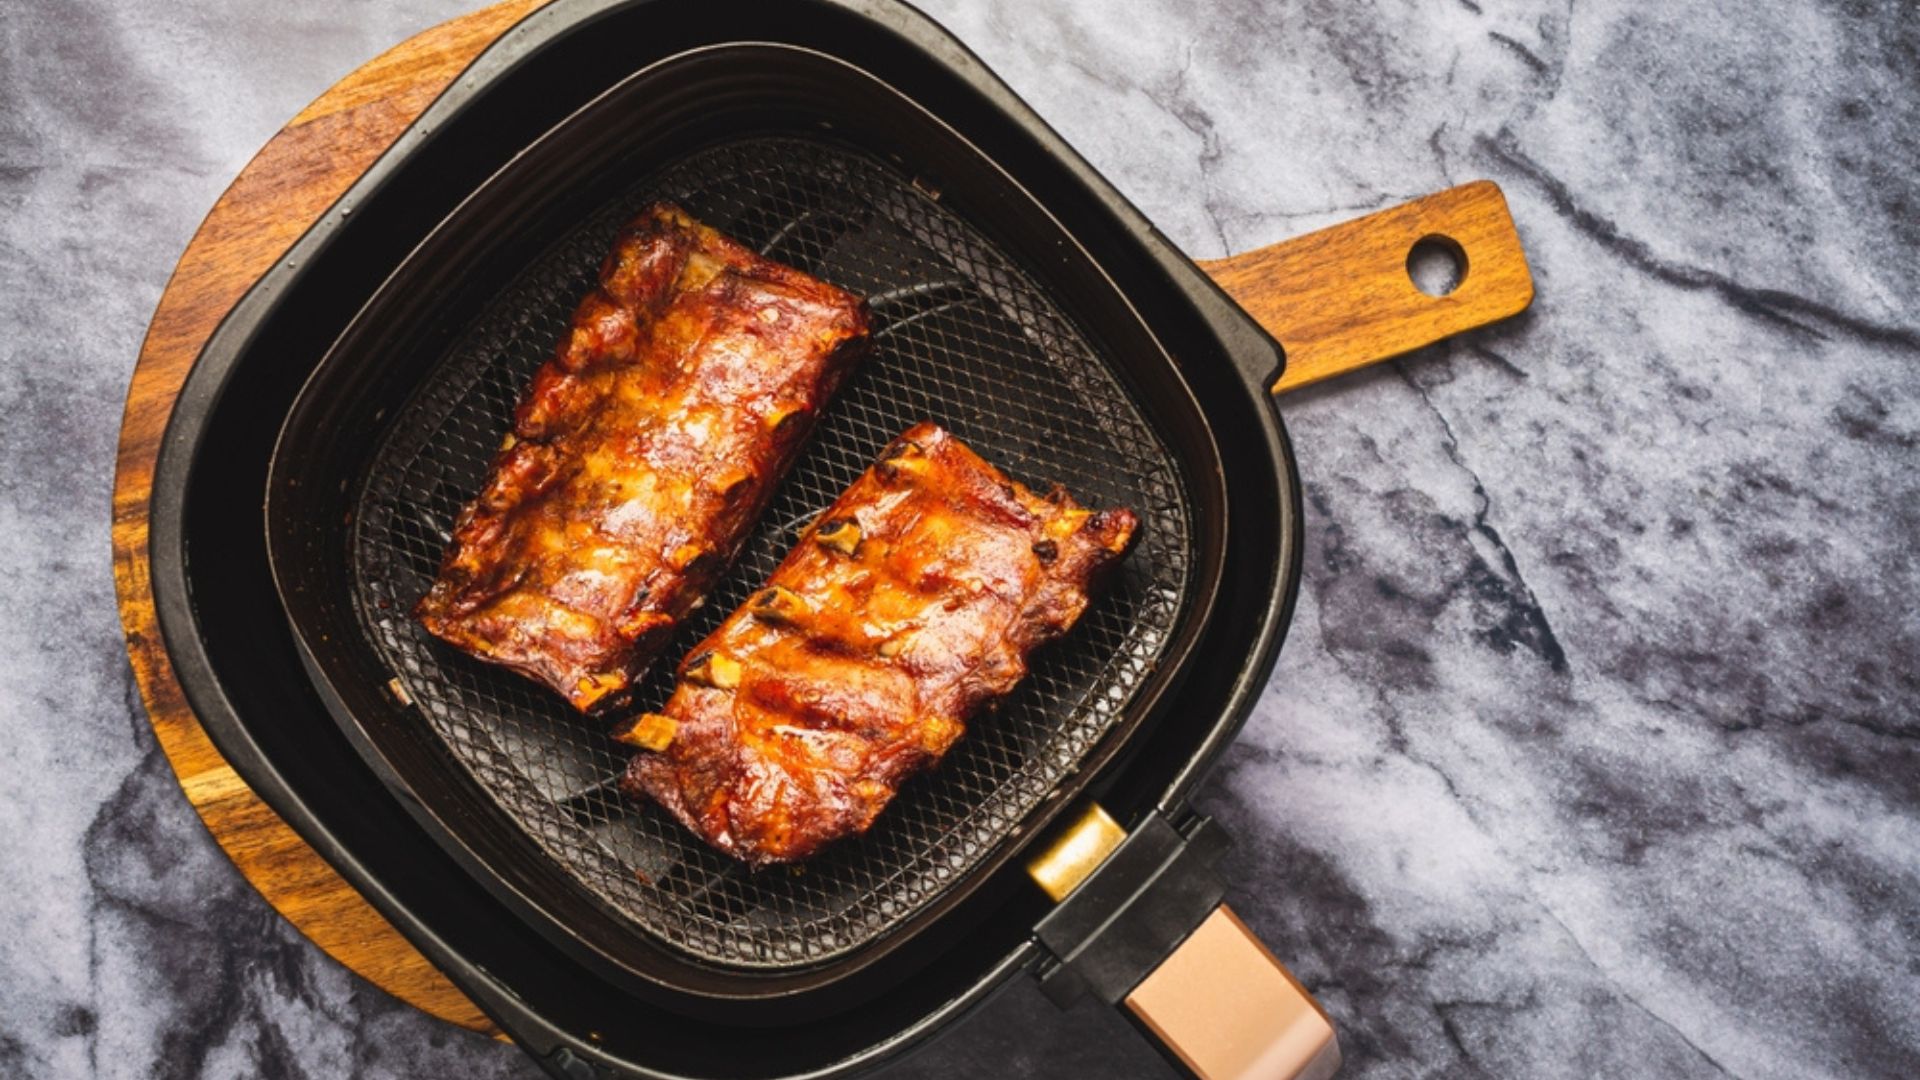 how to reheat ribs in air fryer